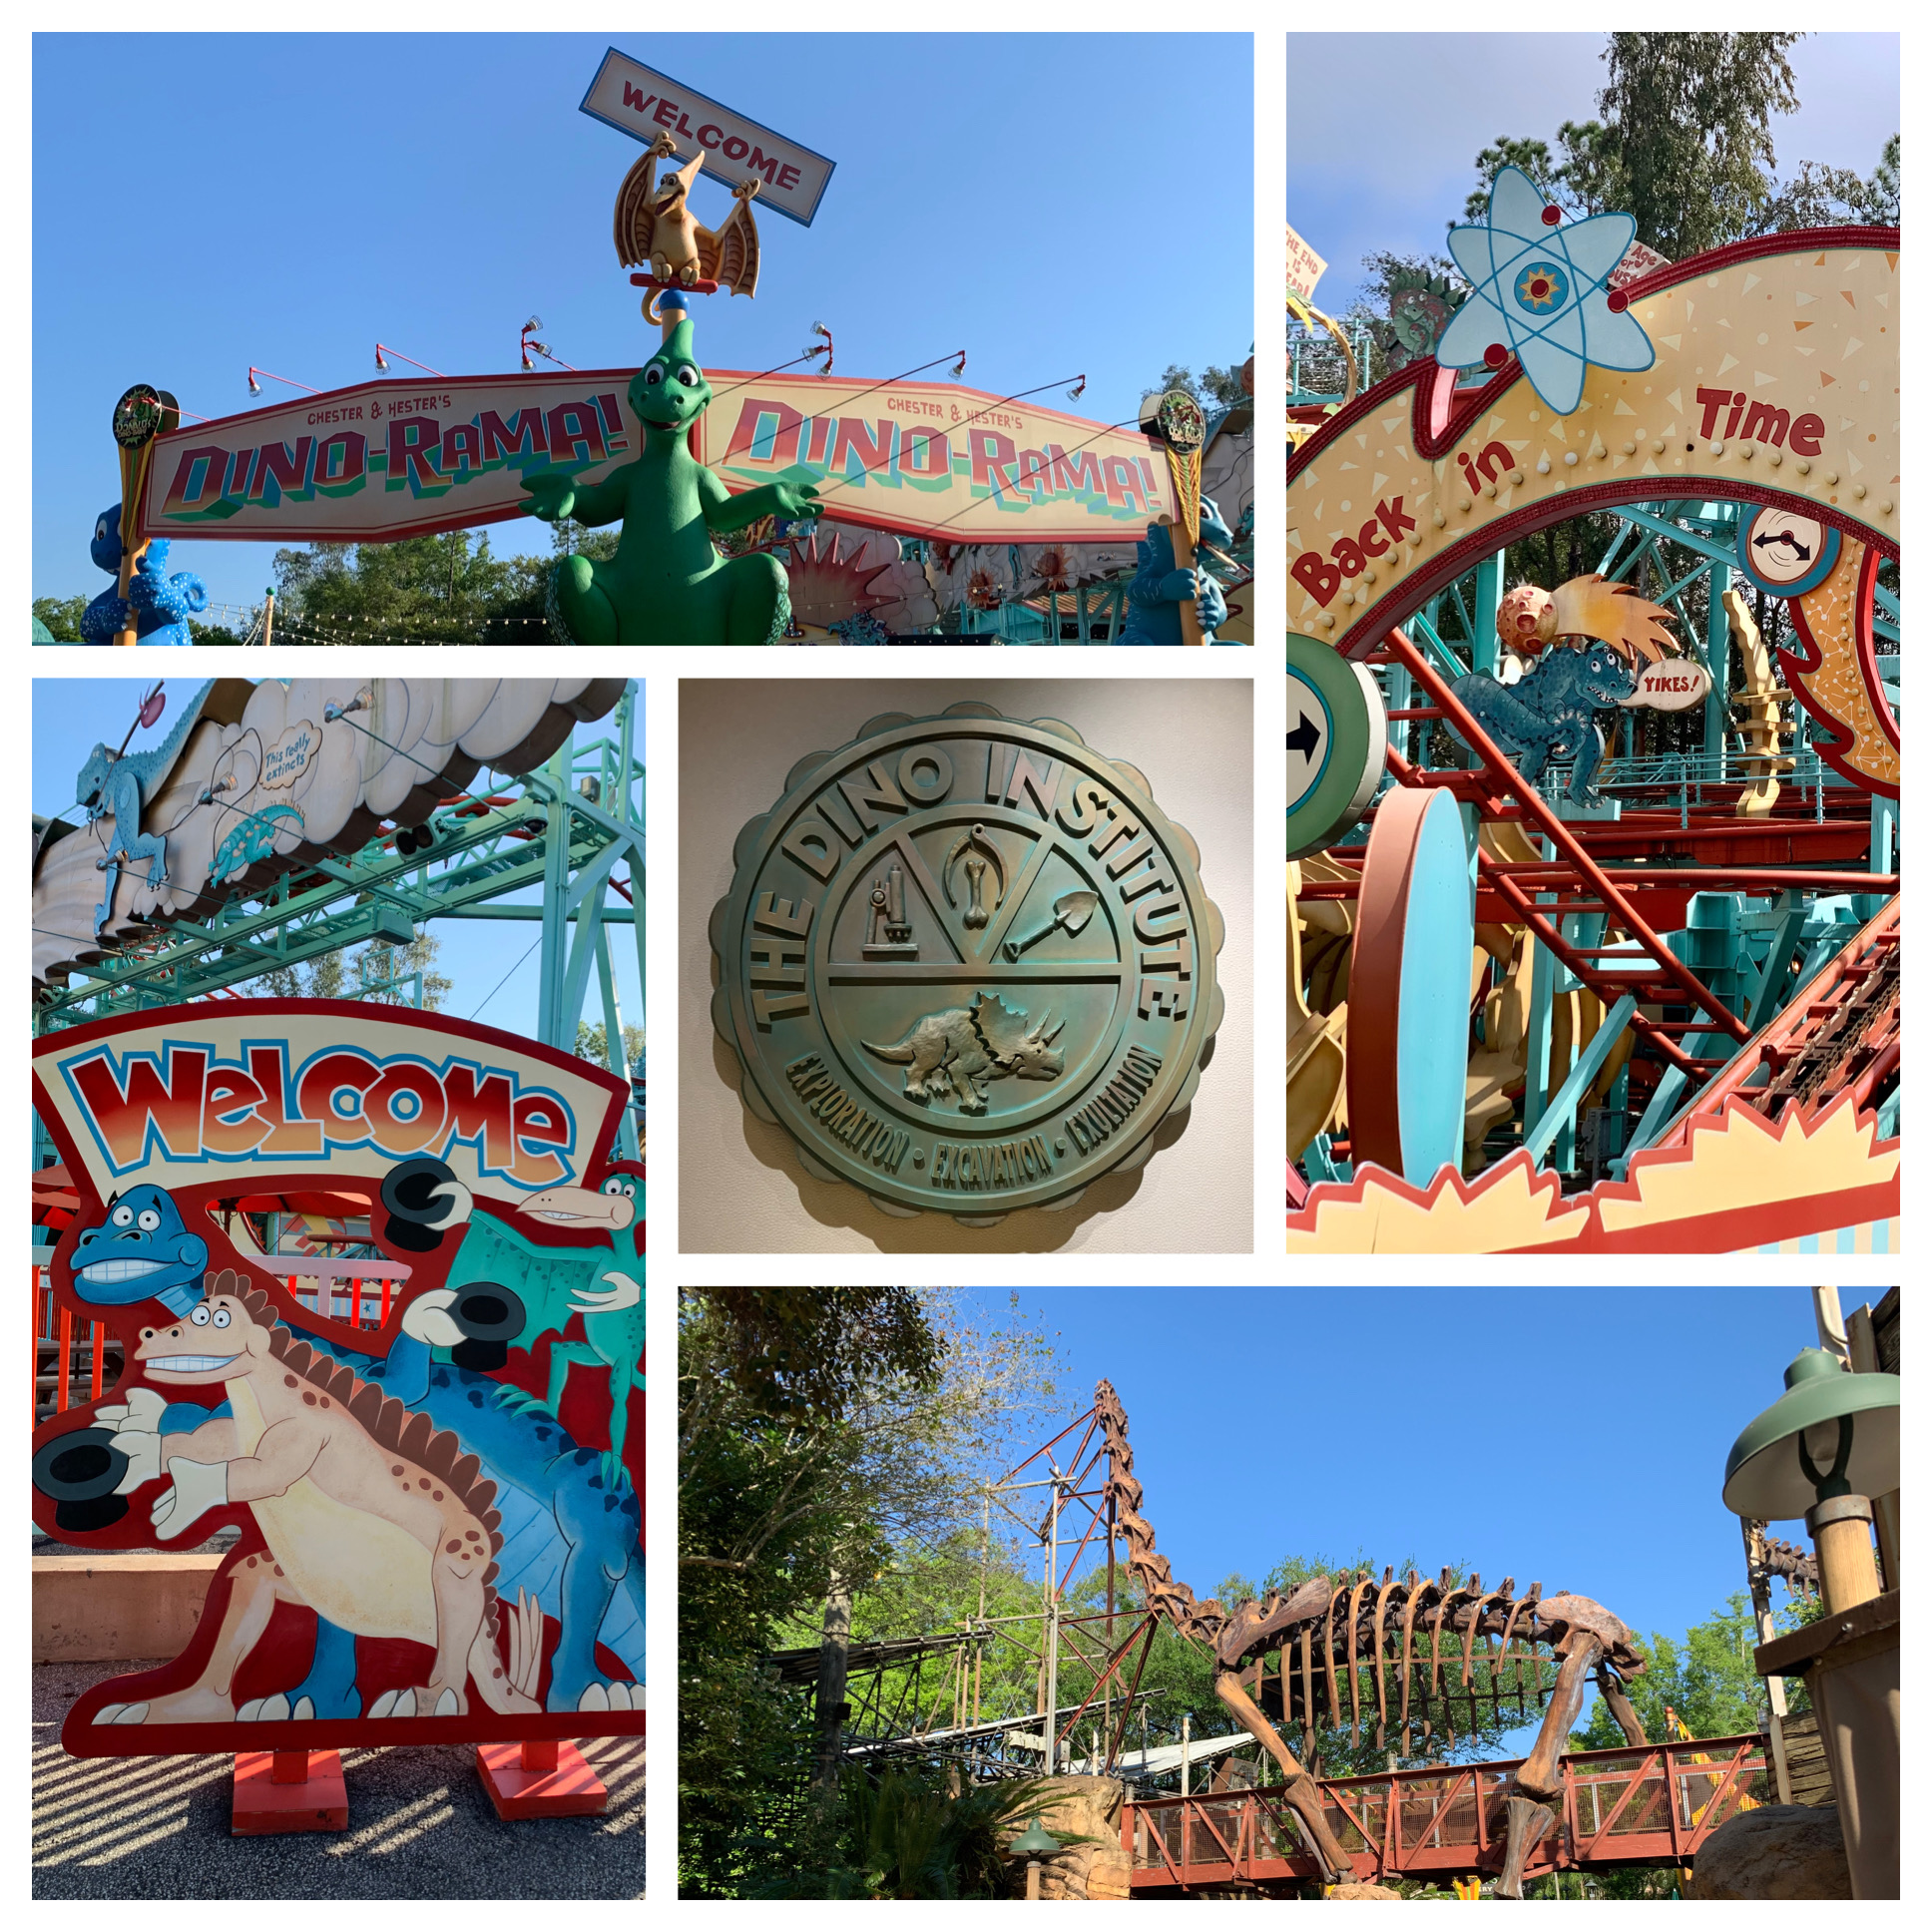 Collage of images from Dinoland, USA. The Dino Institute logo is at the center and a dinosaur skeleton is featured, but other images are reminiscent of tacky roadside attractions.